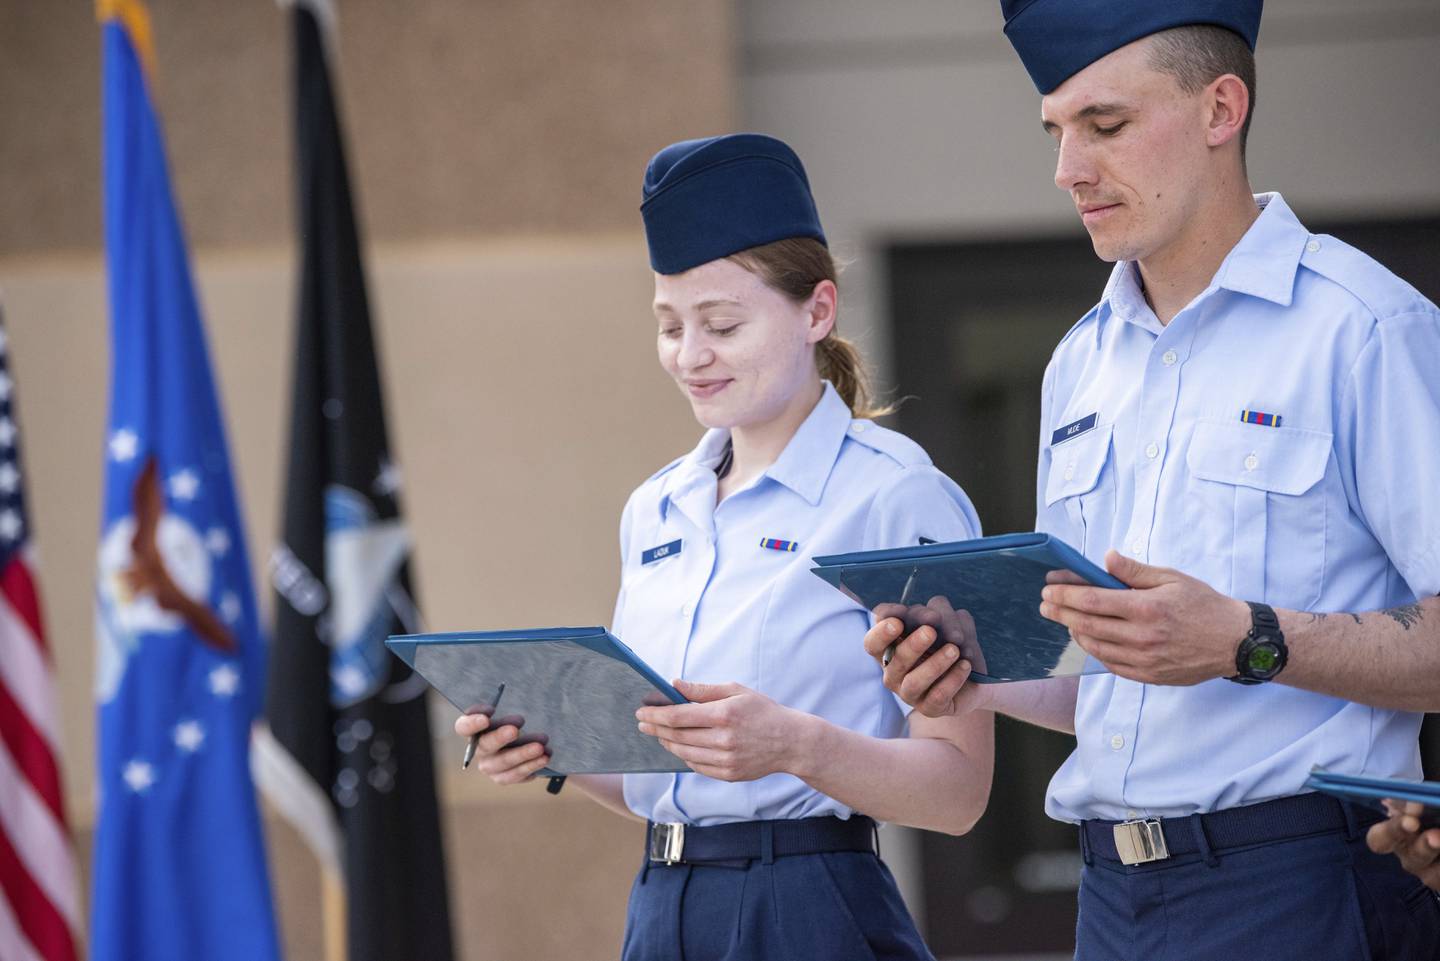 Airman 1st Class Natalia Laziuk, from Russia, left, and Airman 1st Class Ross Mudie, from South Africa, look at their U.S. Certificates of Citizenship after signing it following the Basic Military Training Coin Ceremony on April 26, 2023, at Joint Base San Antonio-Lackland, Texas.